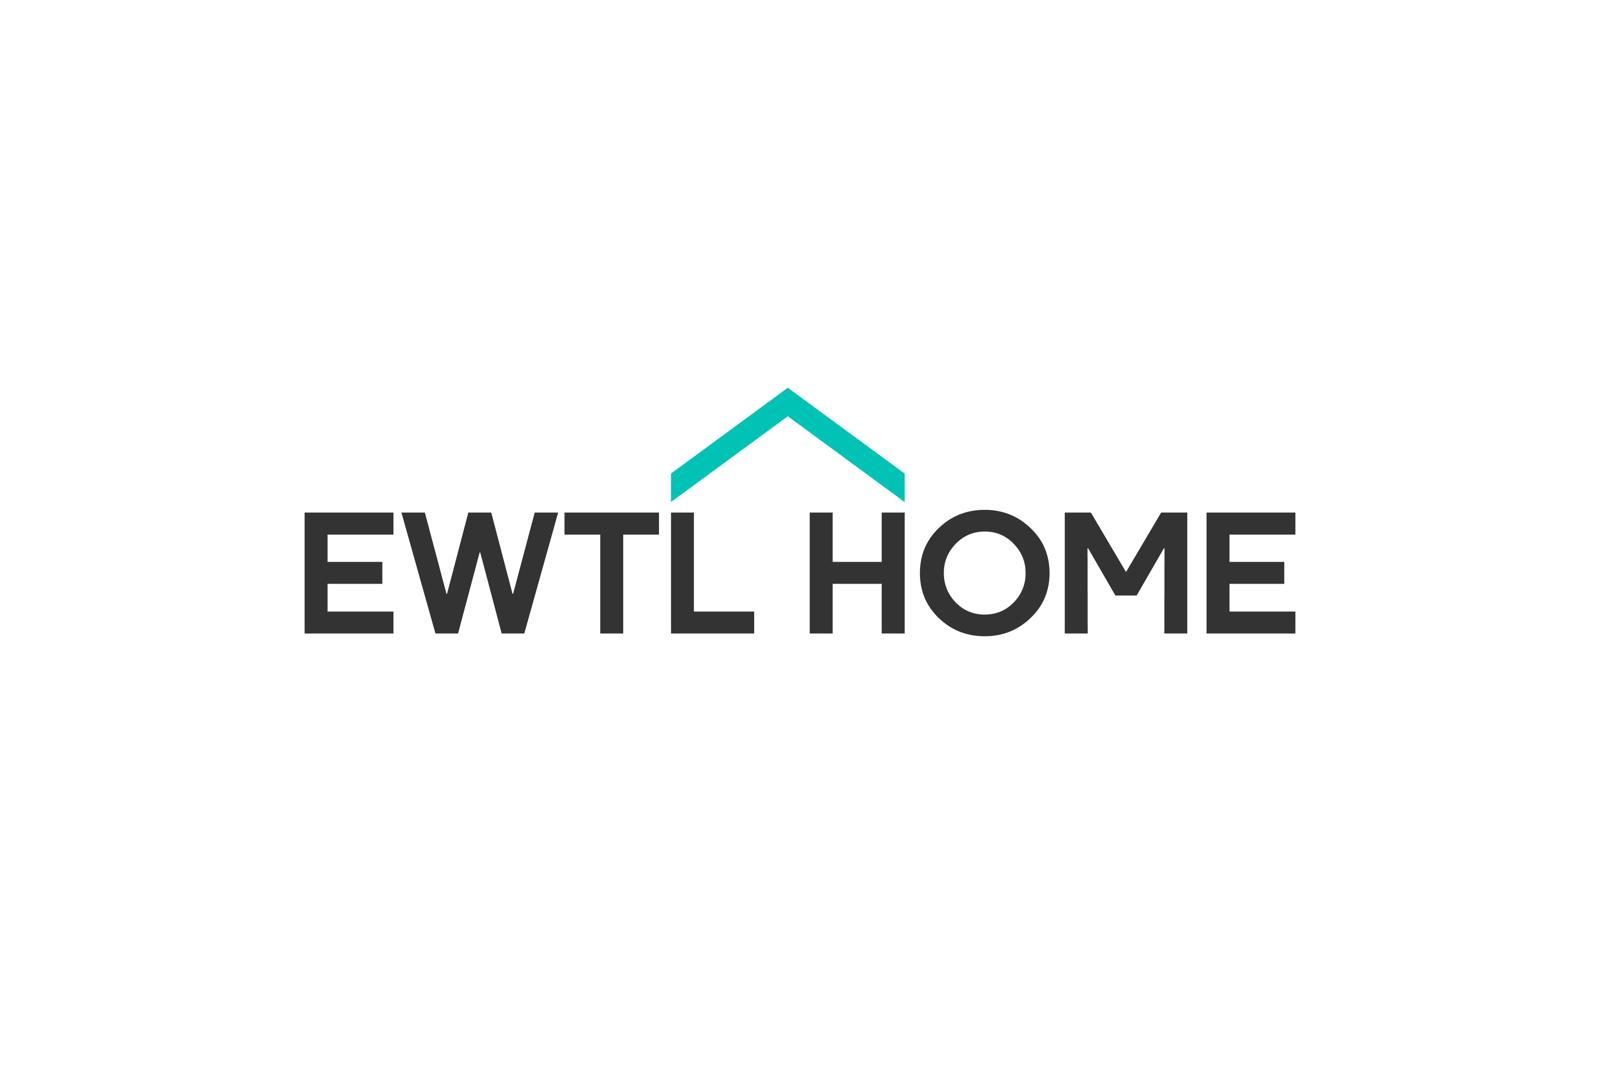 EWTL Home featured image